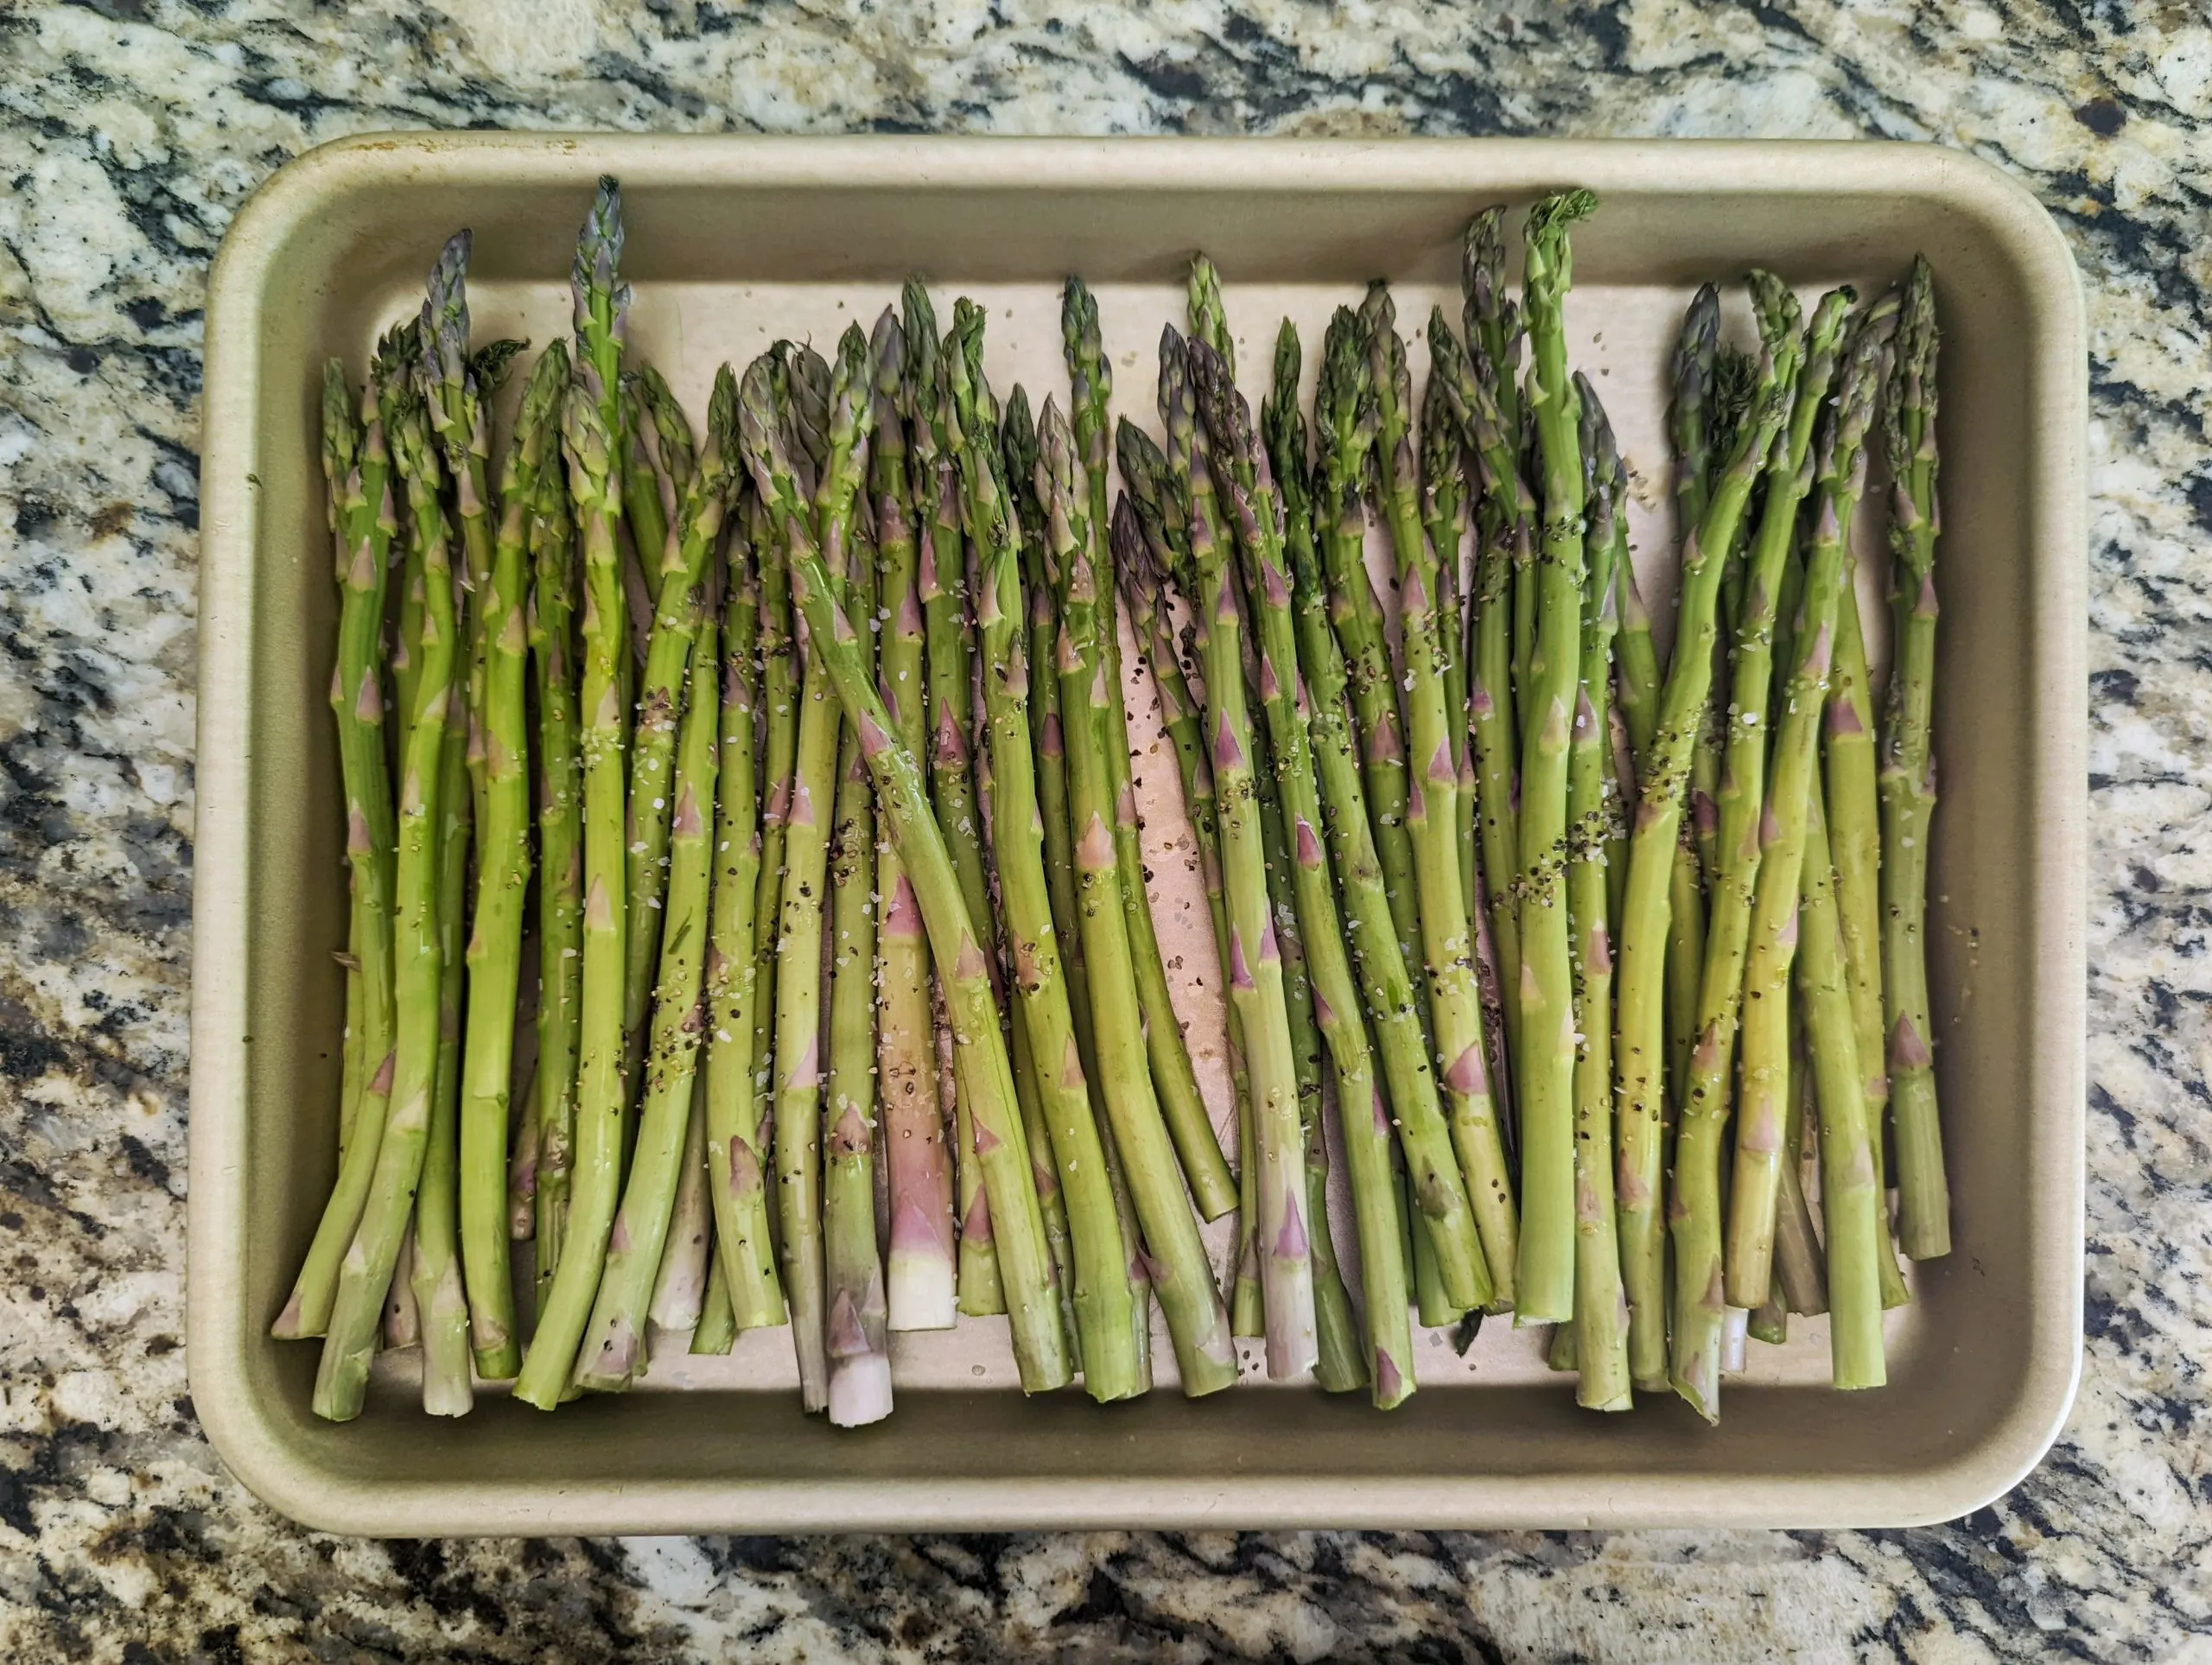 Line the asparagus onto the baking sheet and drizzle with oil and season.